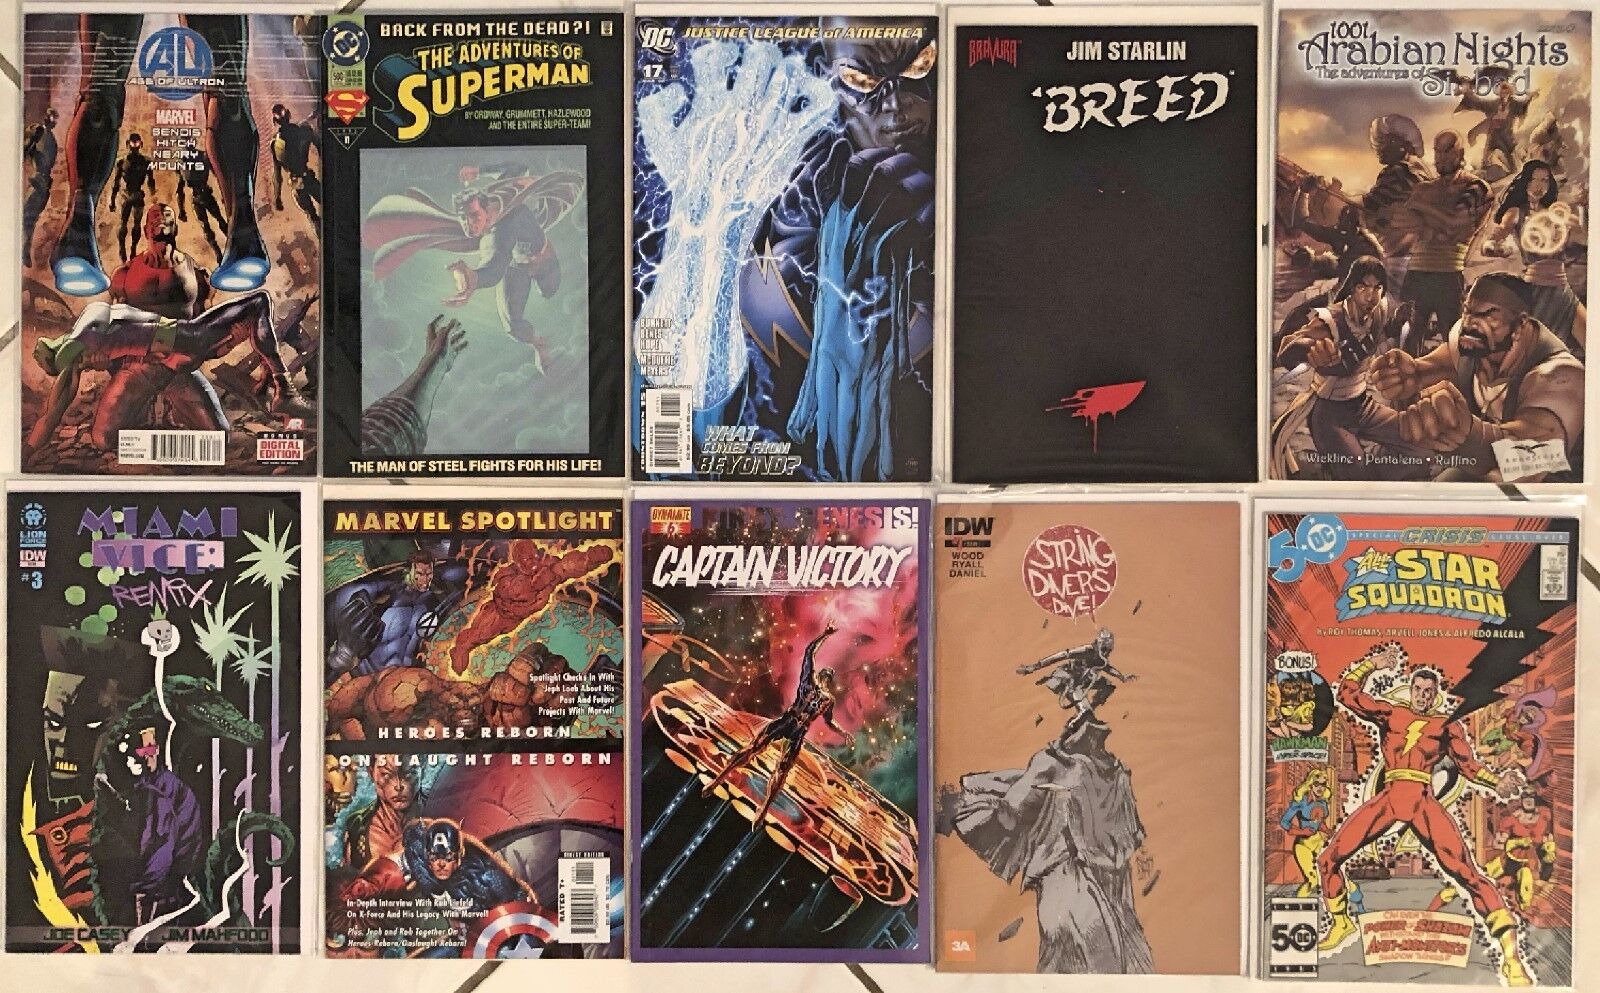 10 Comics Superman Breed Justice League Ultron String Captain Victory and more